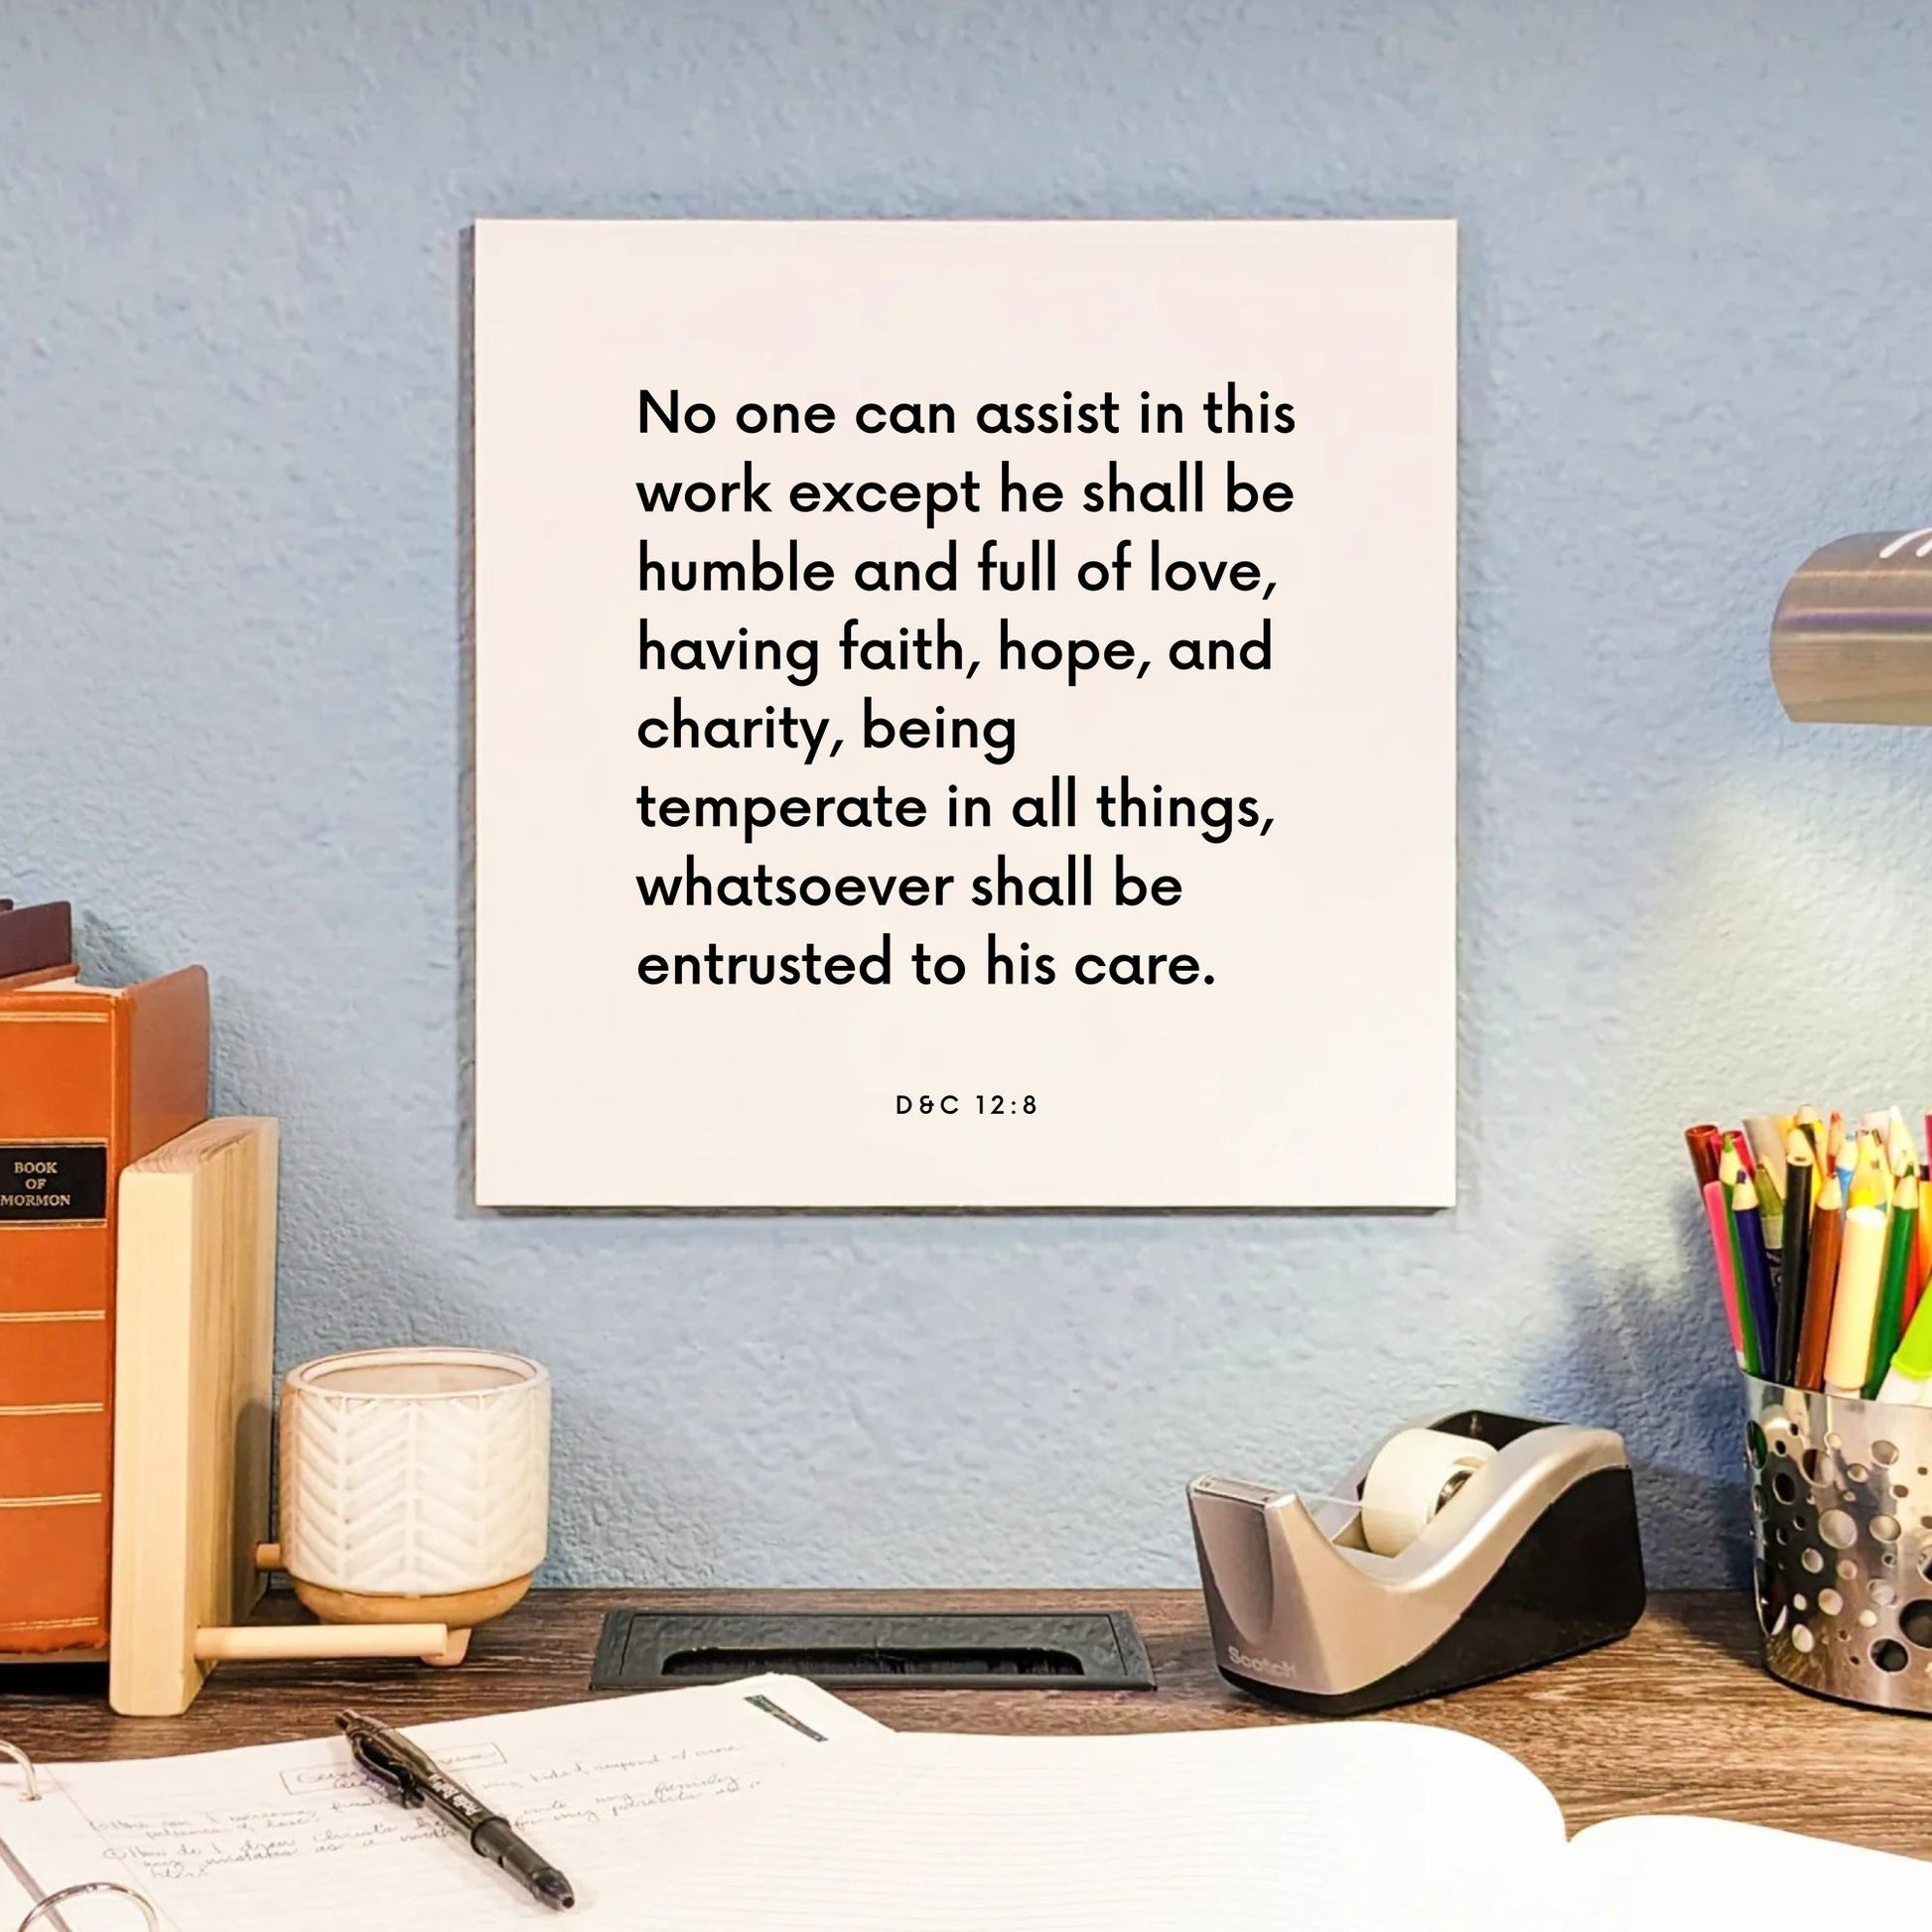 Desk mouting of the scripture tile for D&C 12:8 - "No one can assist in this work except he shall be humble"